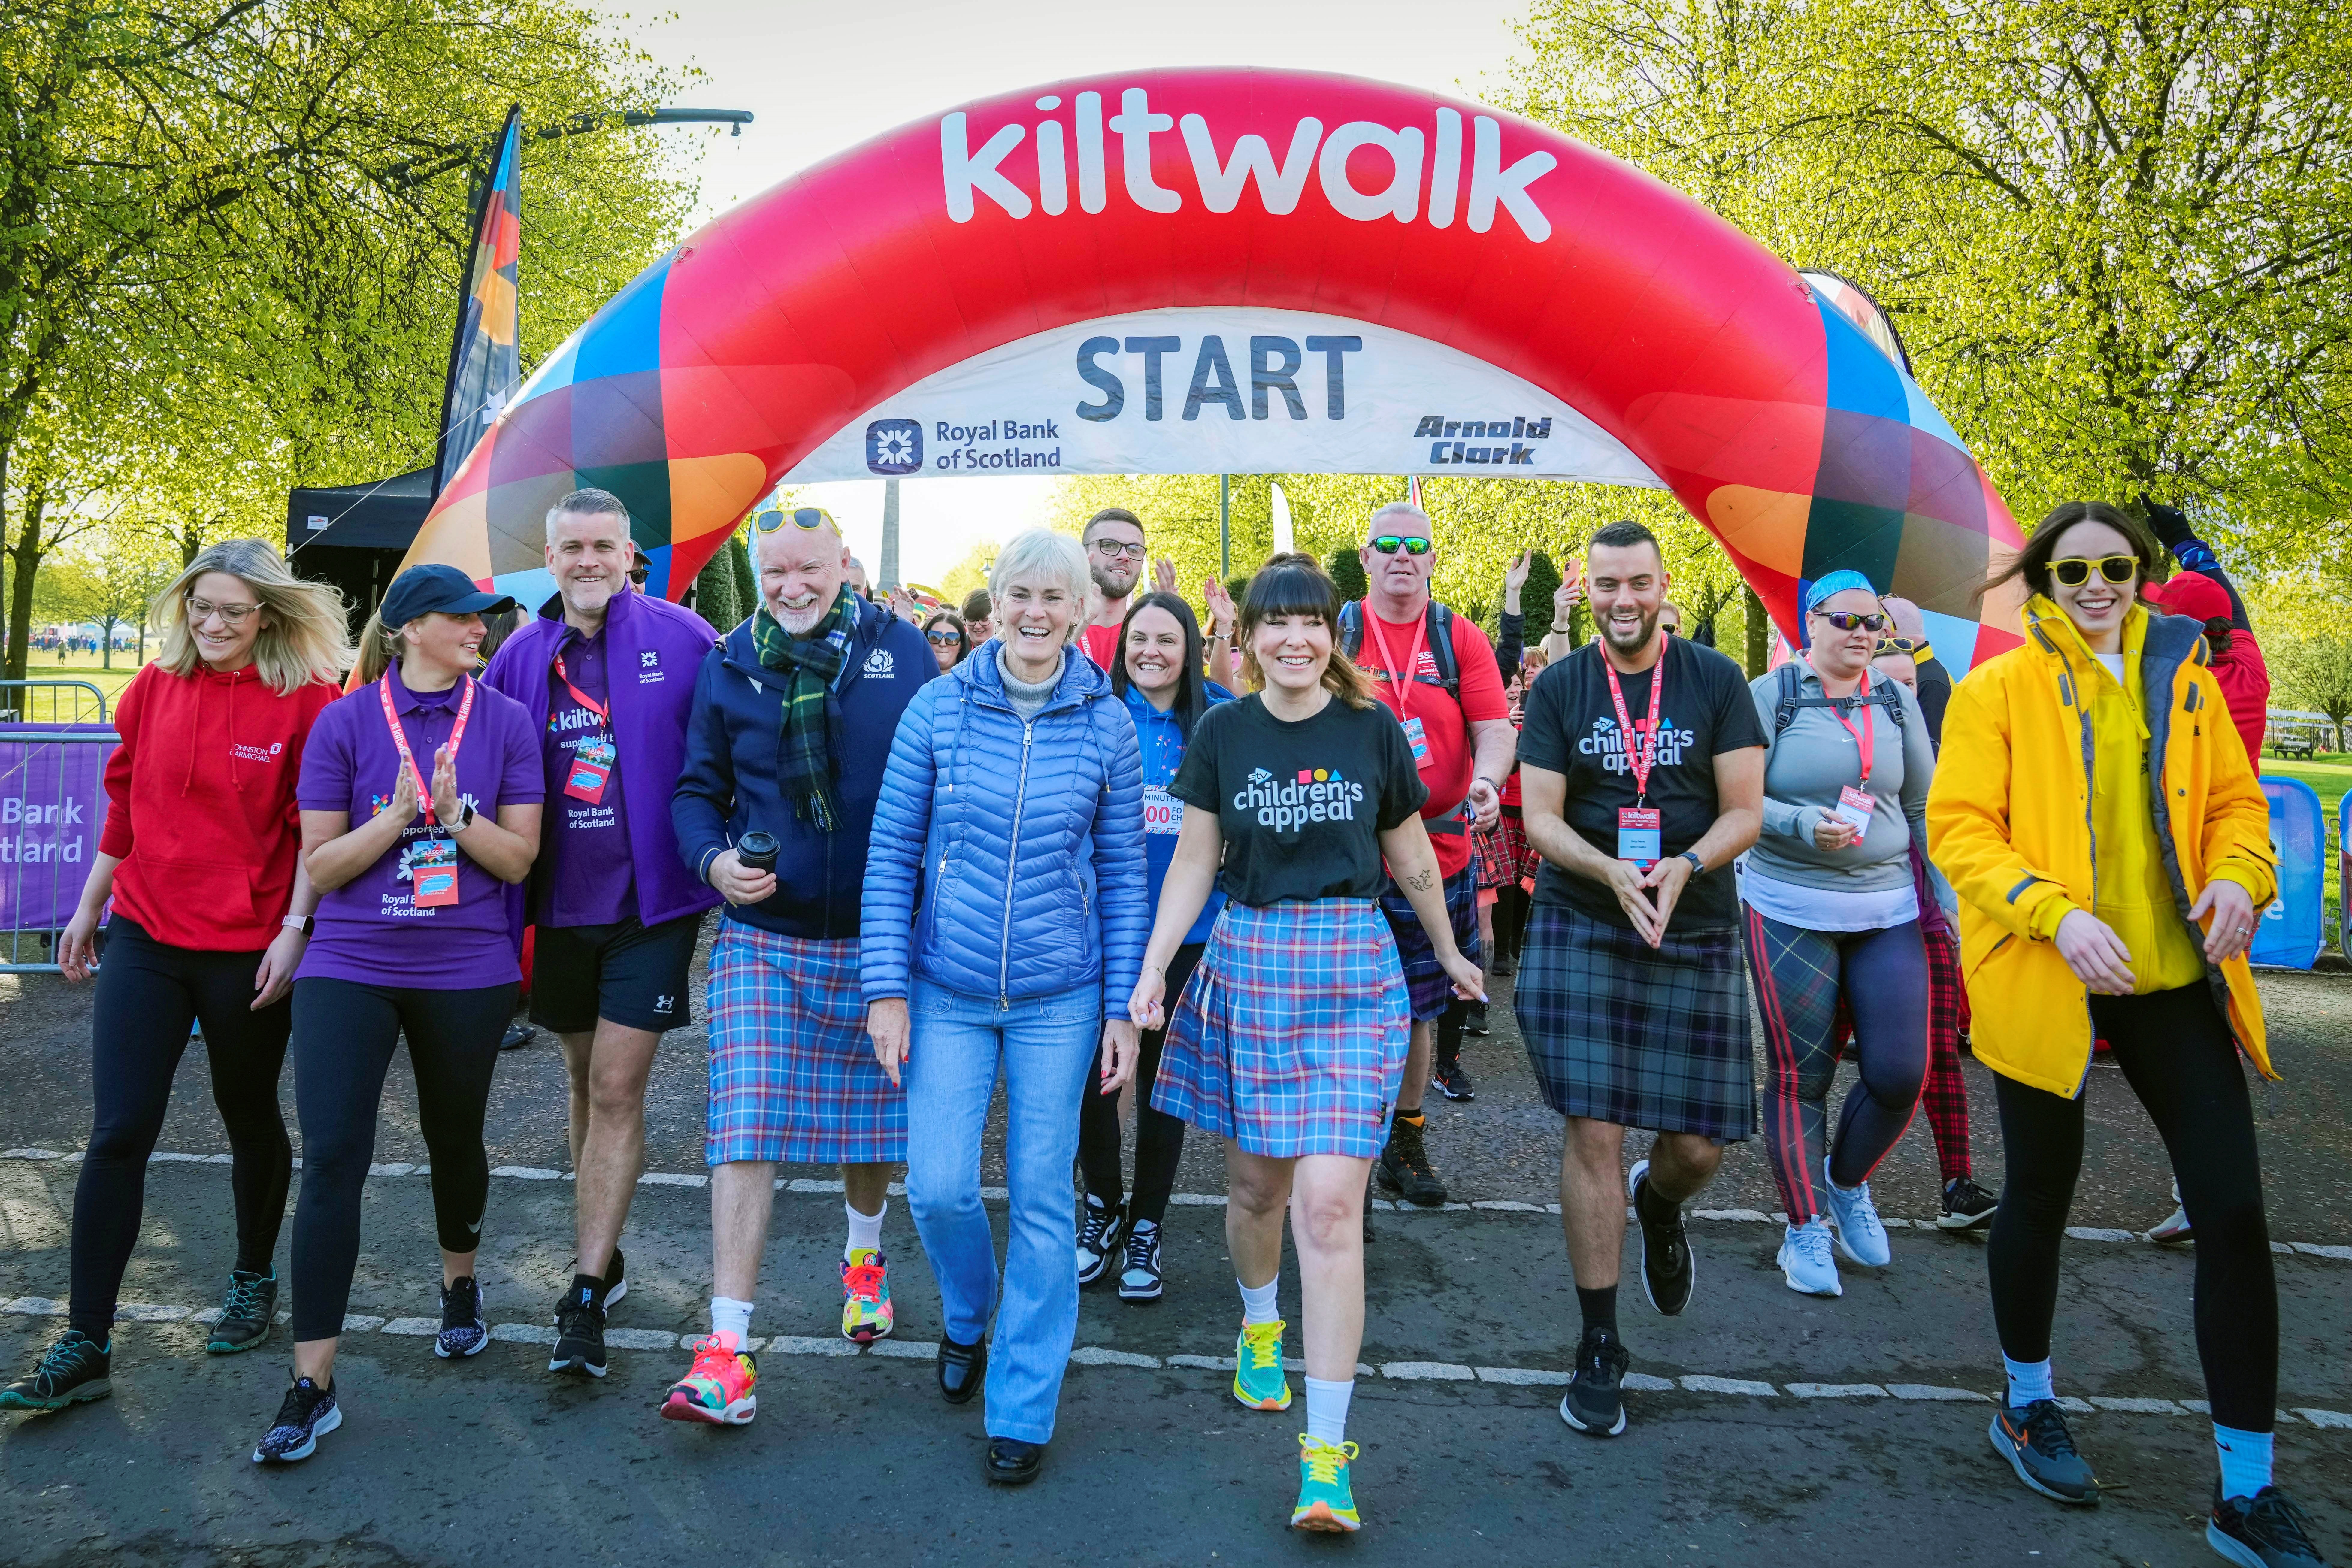 Sir Tom Hunter, Judy Murray and Kiltwalk Sponsors lead out the Mighty Stride